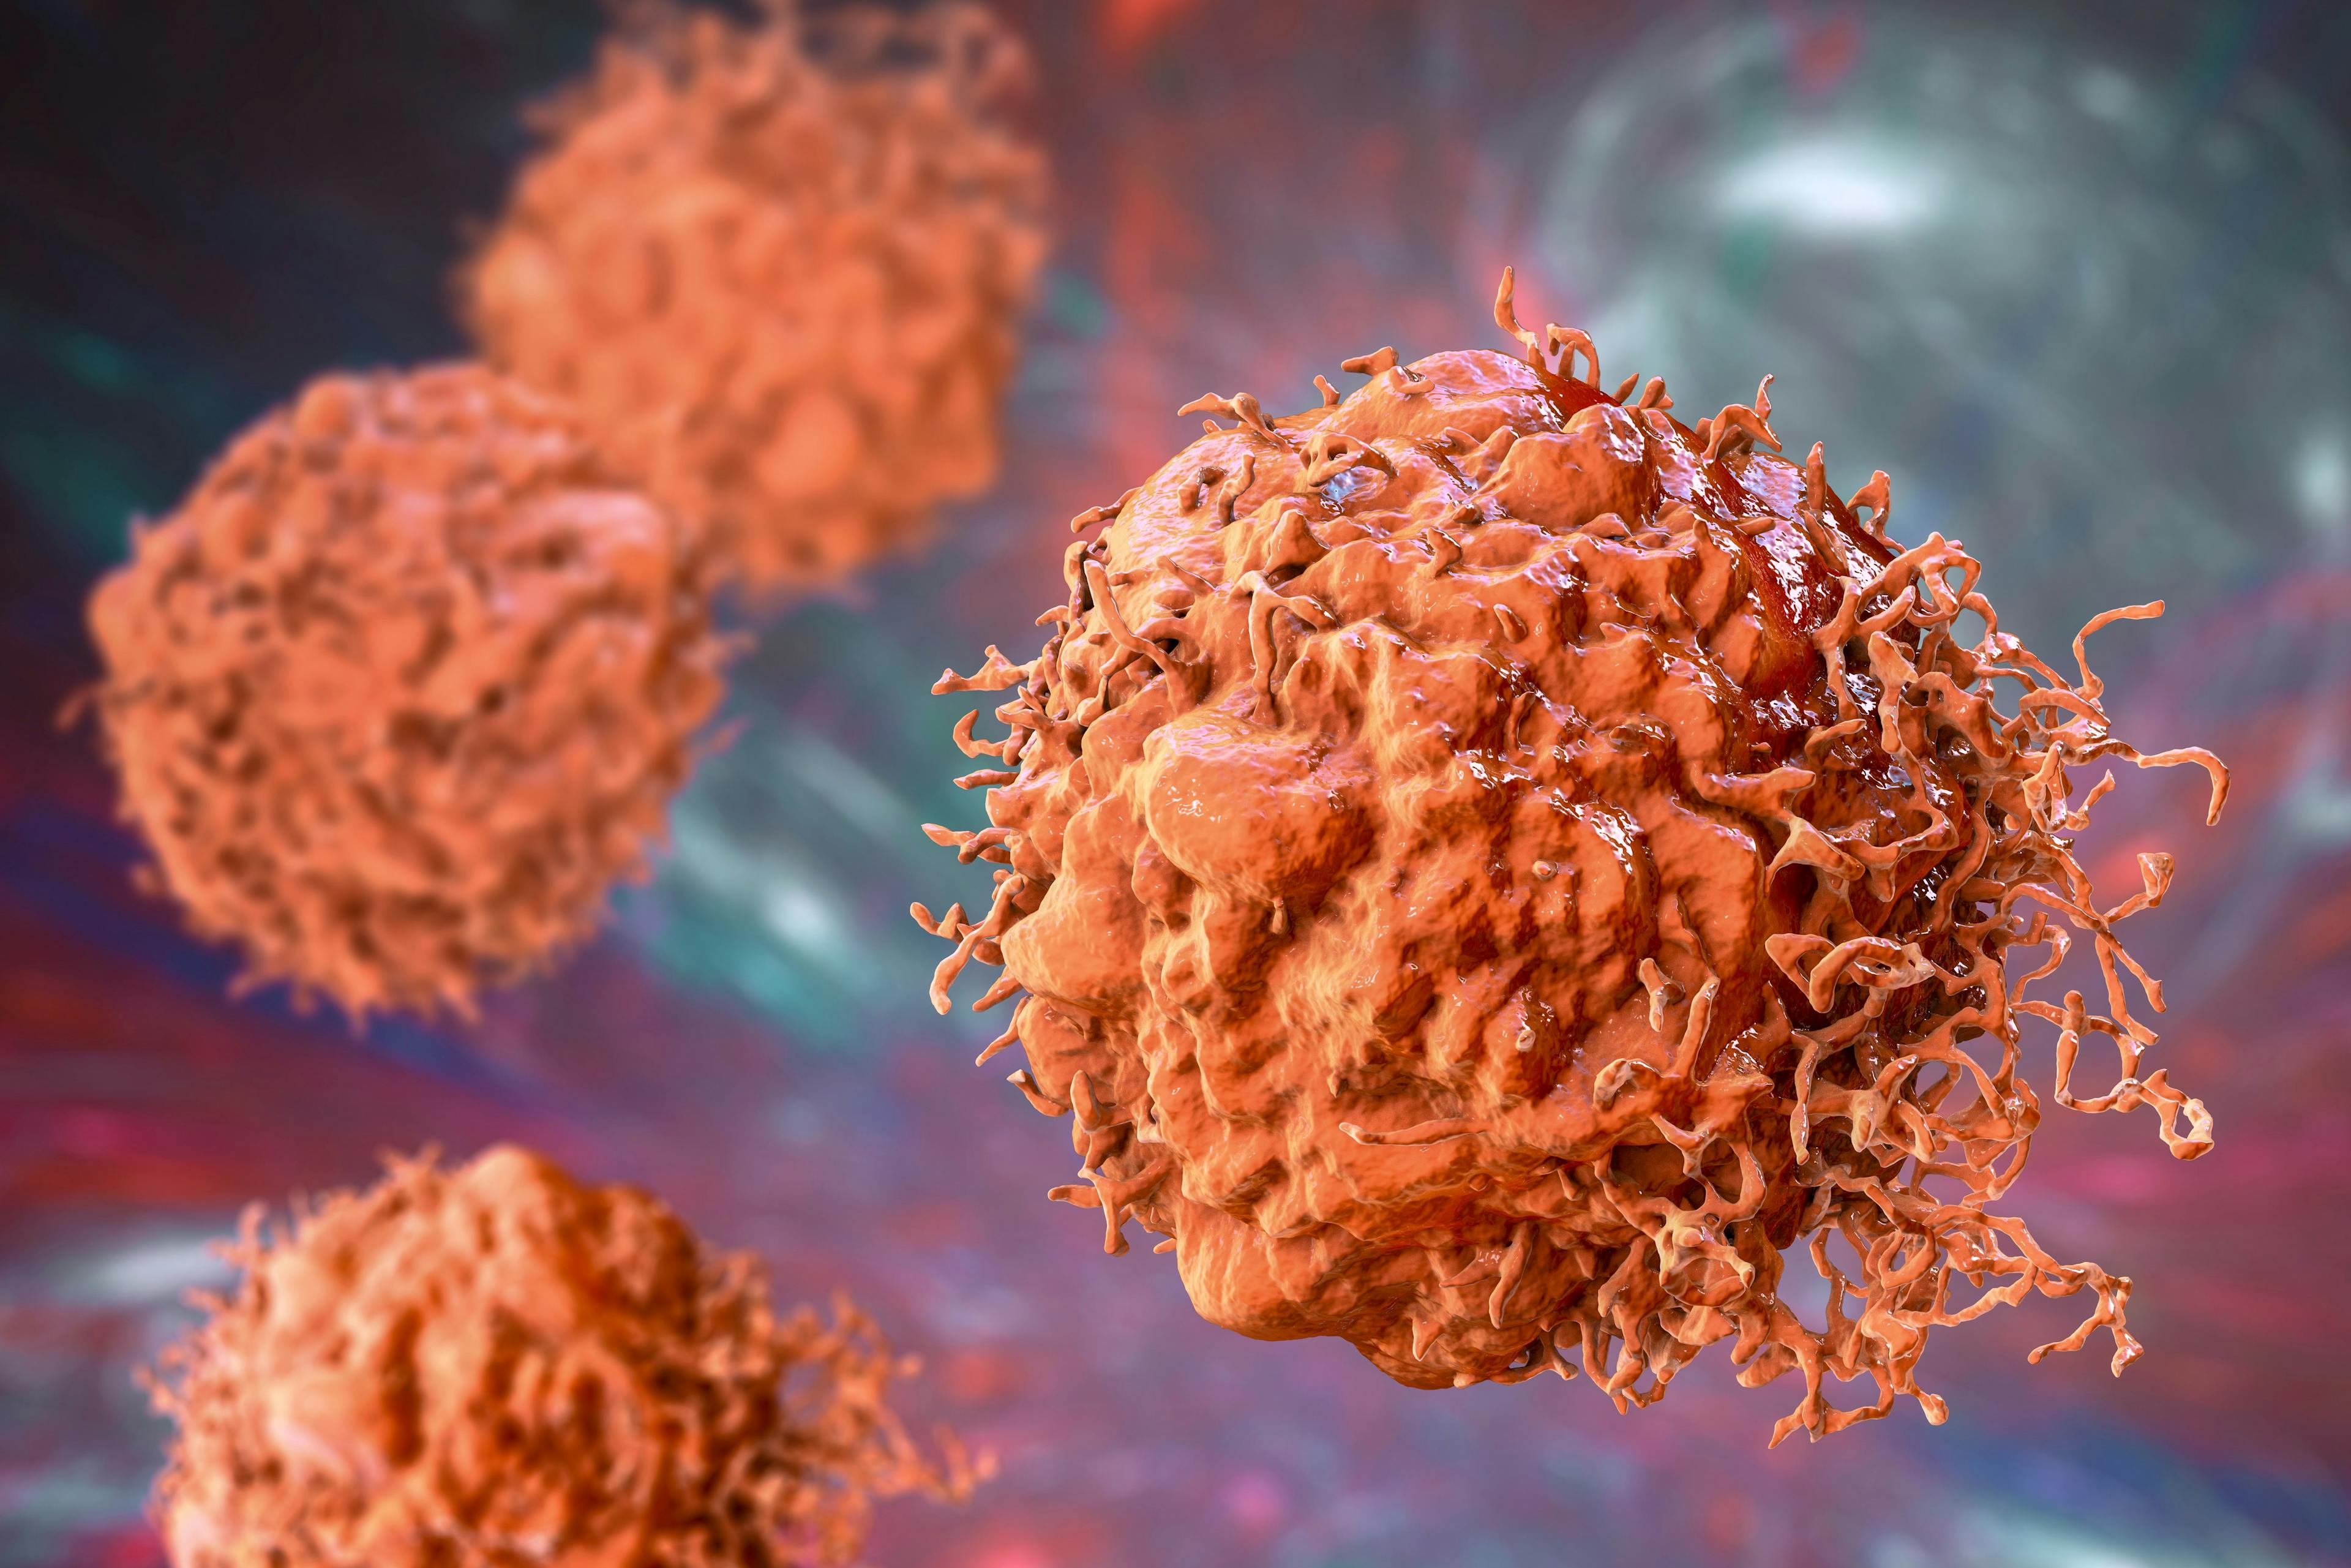 Phase 3 Study Supports Pembrolizumab Plus Lenvatinib as Standard of Care in Patients With Advanced Endometrial Cancer Who Received Prior Platinum Therapy